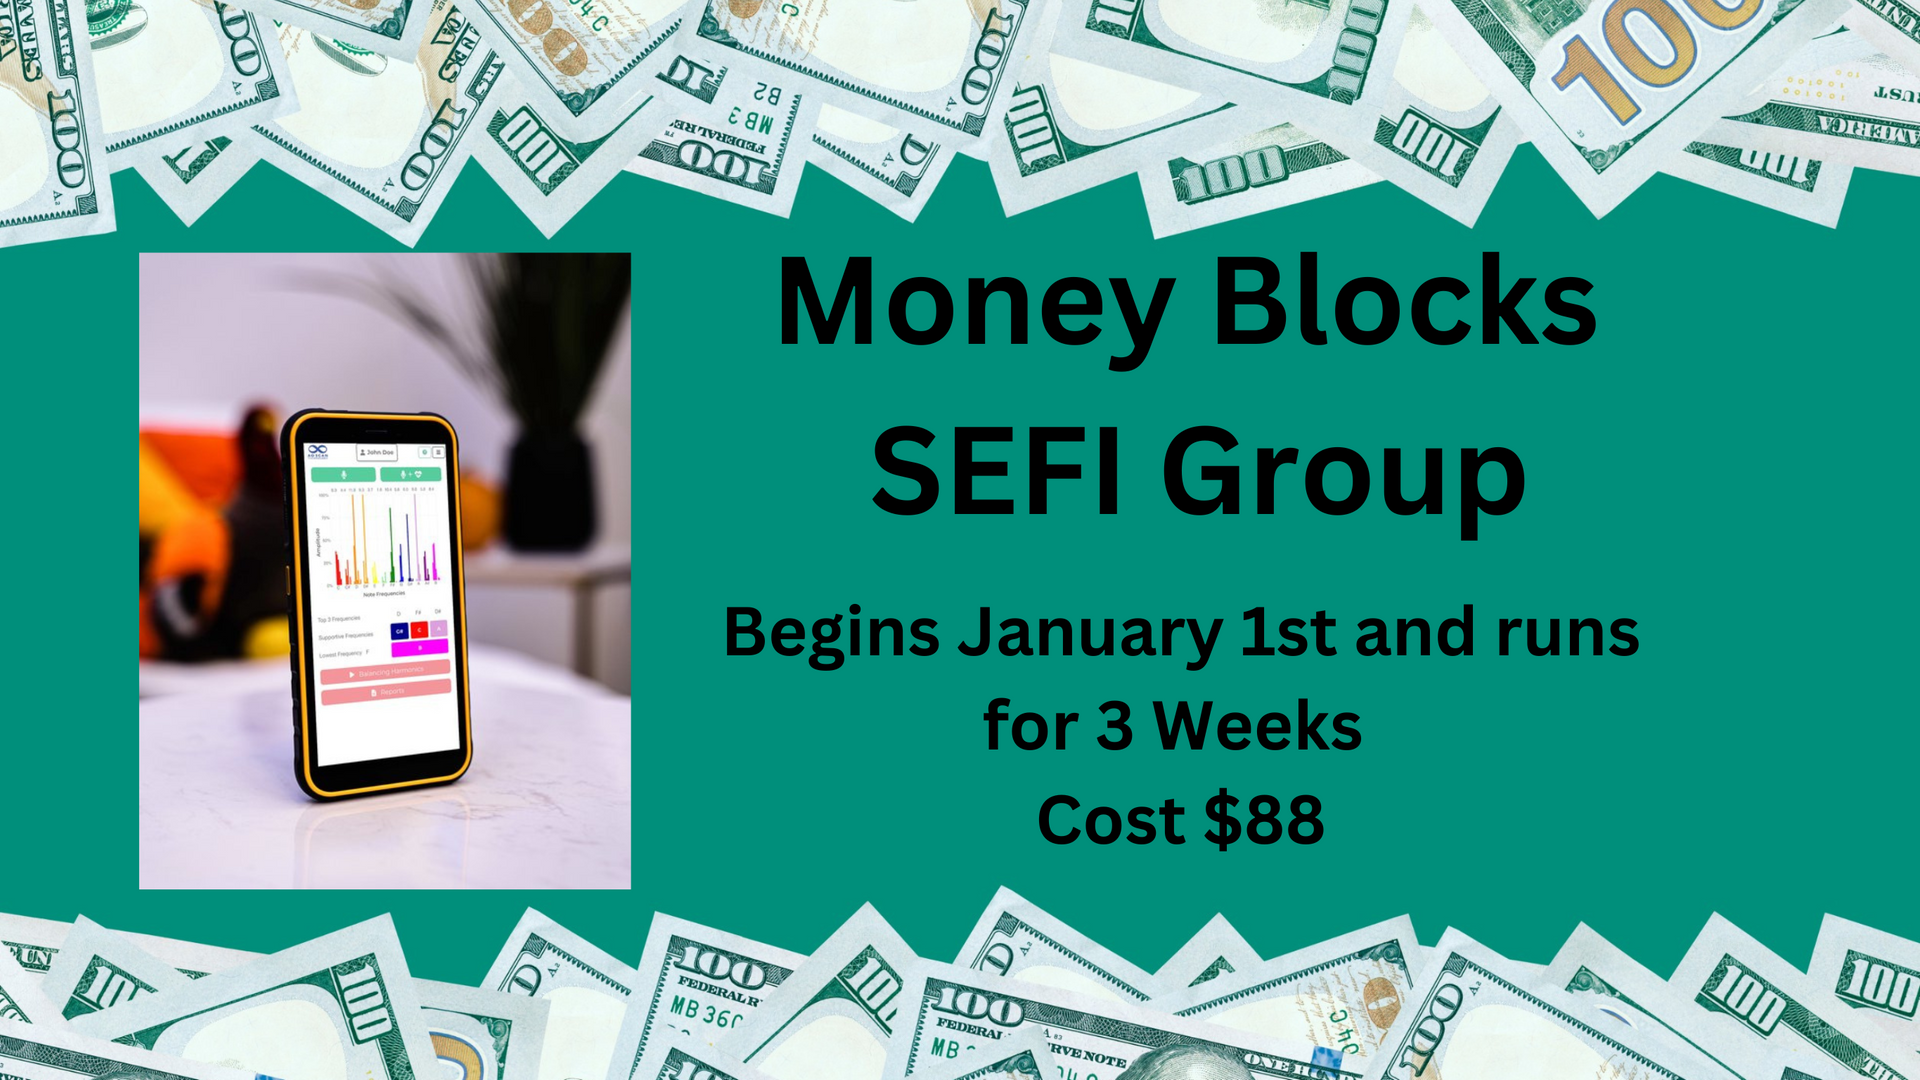 money blocks sefi group begins january 1st and runs for 3 weeks cost $ 88